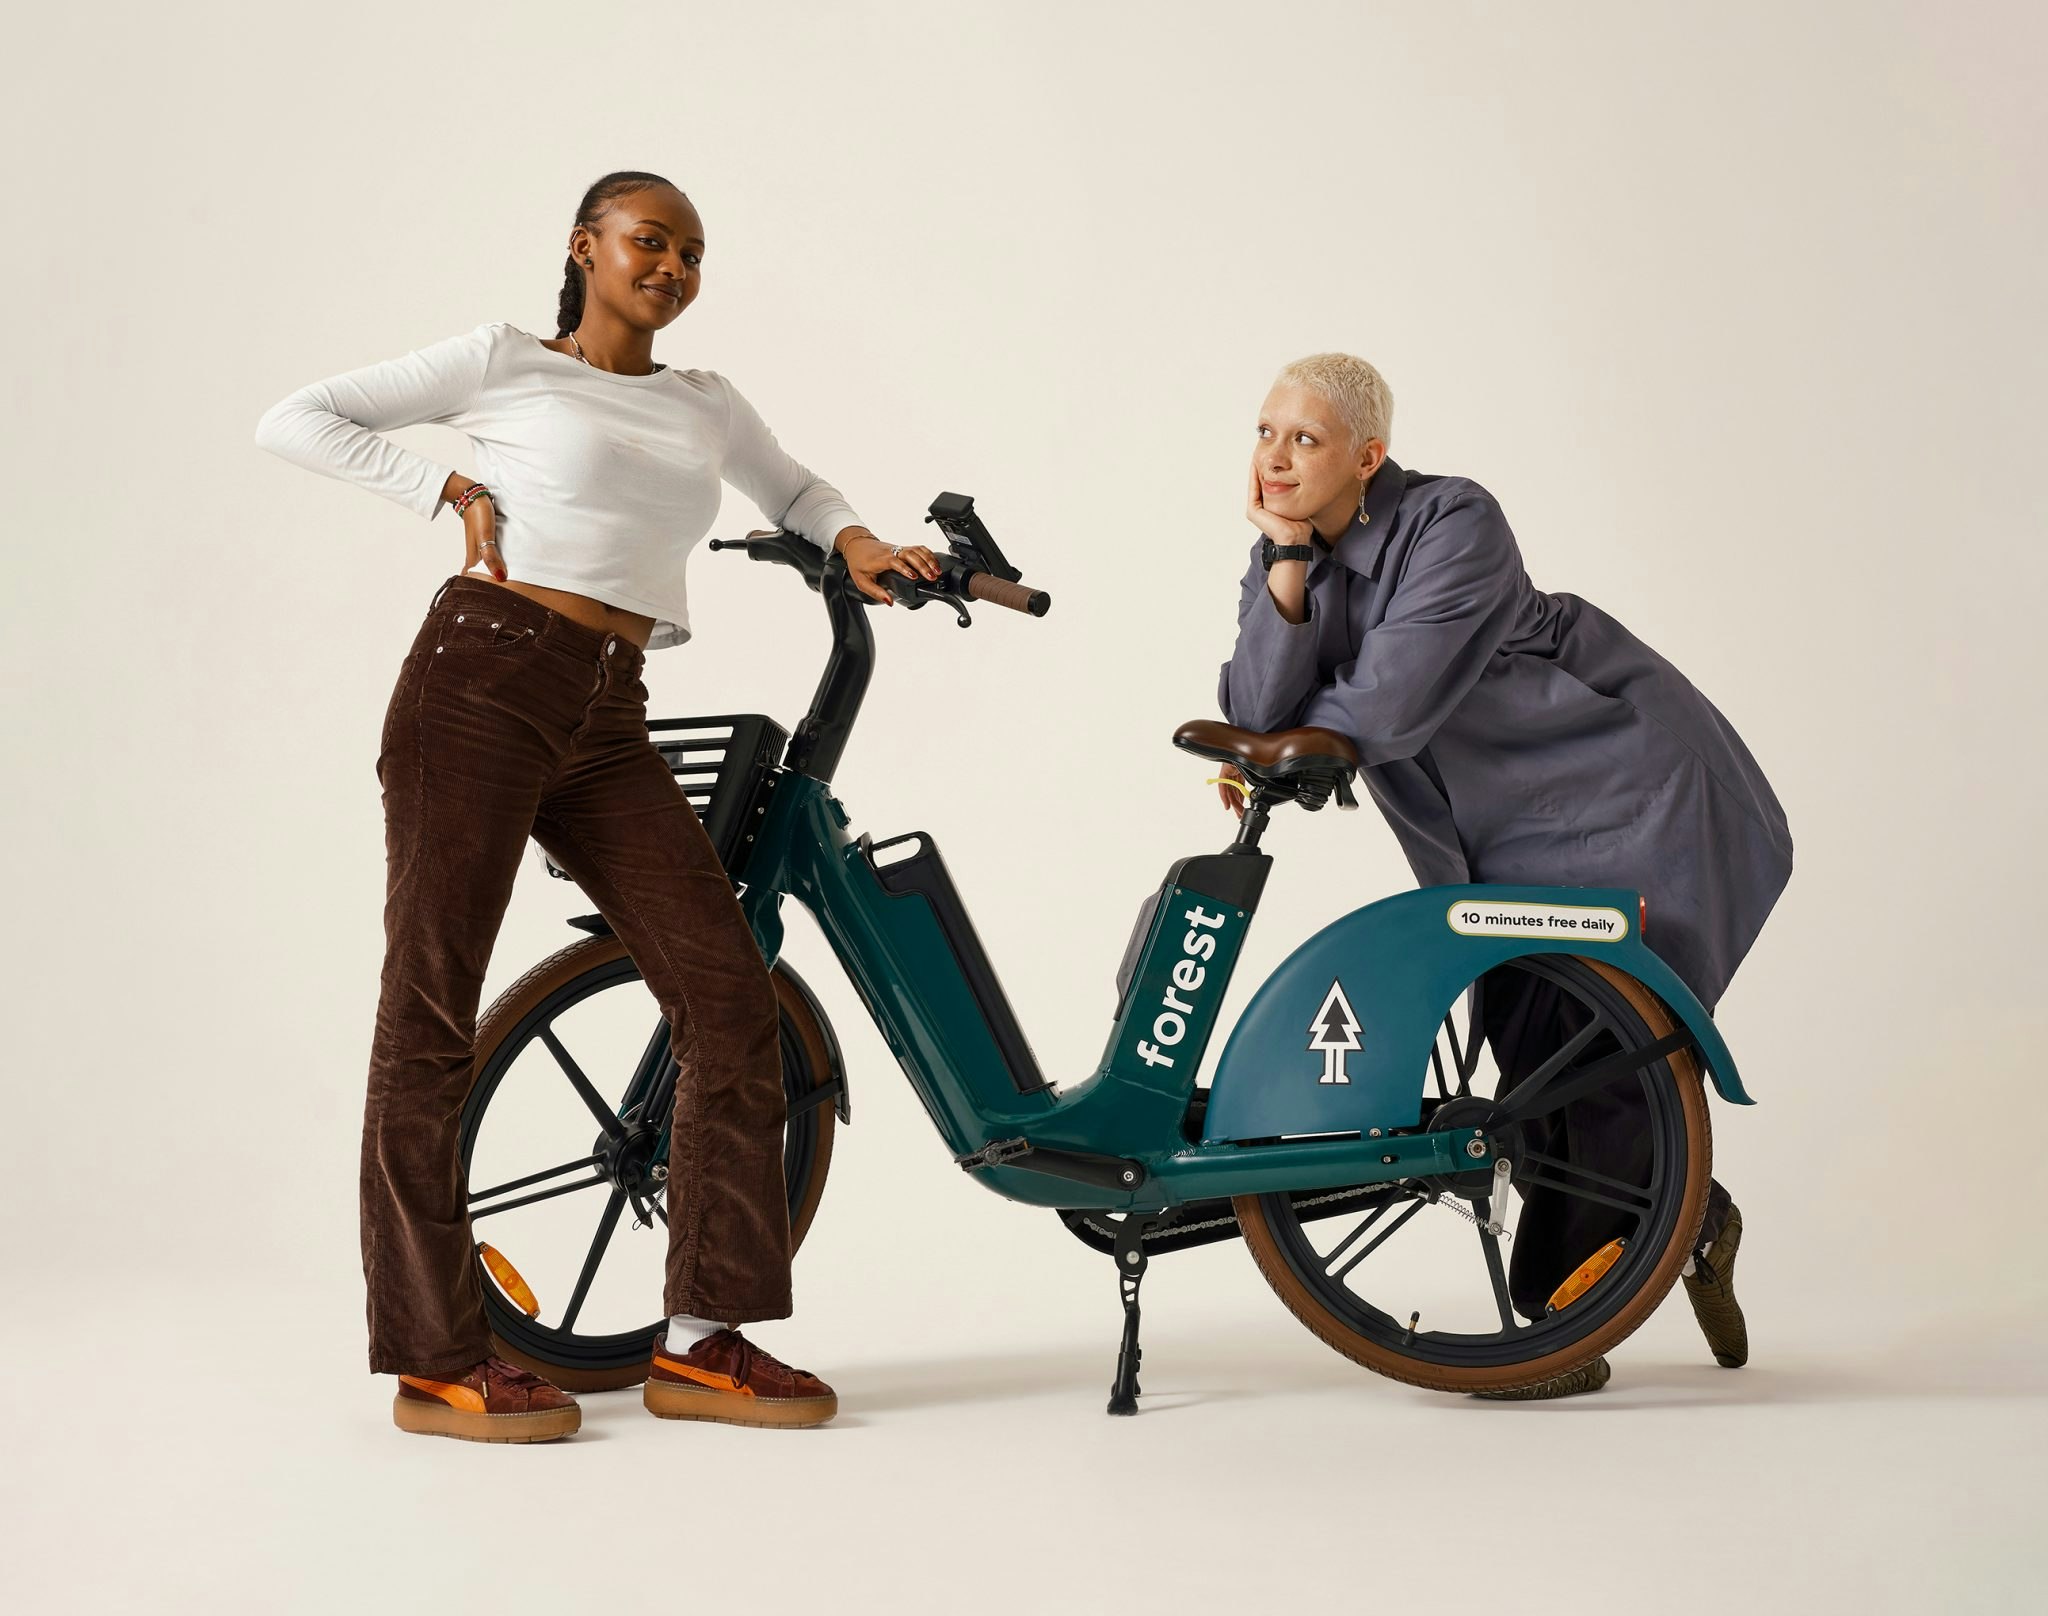 Two people posing next to a Forest e-bike.